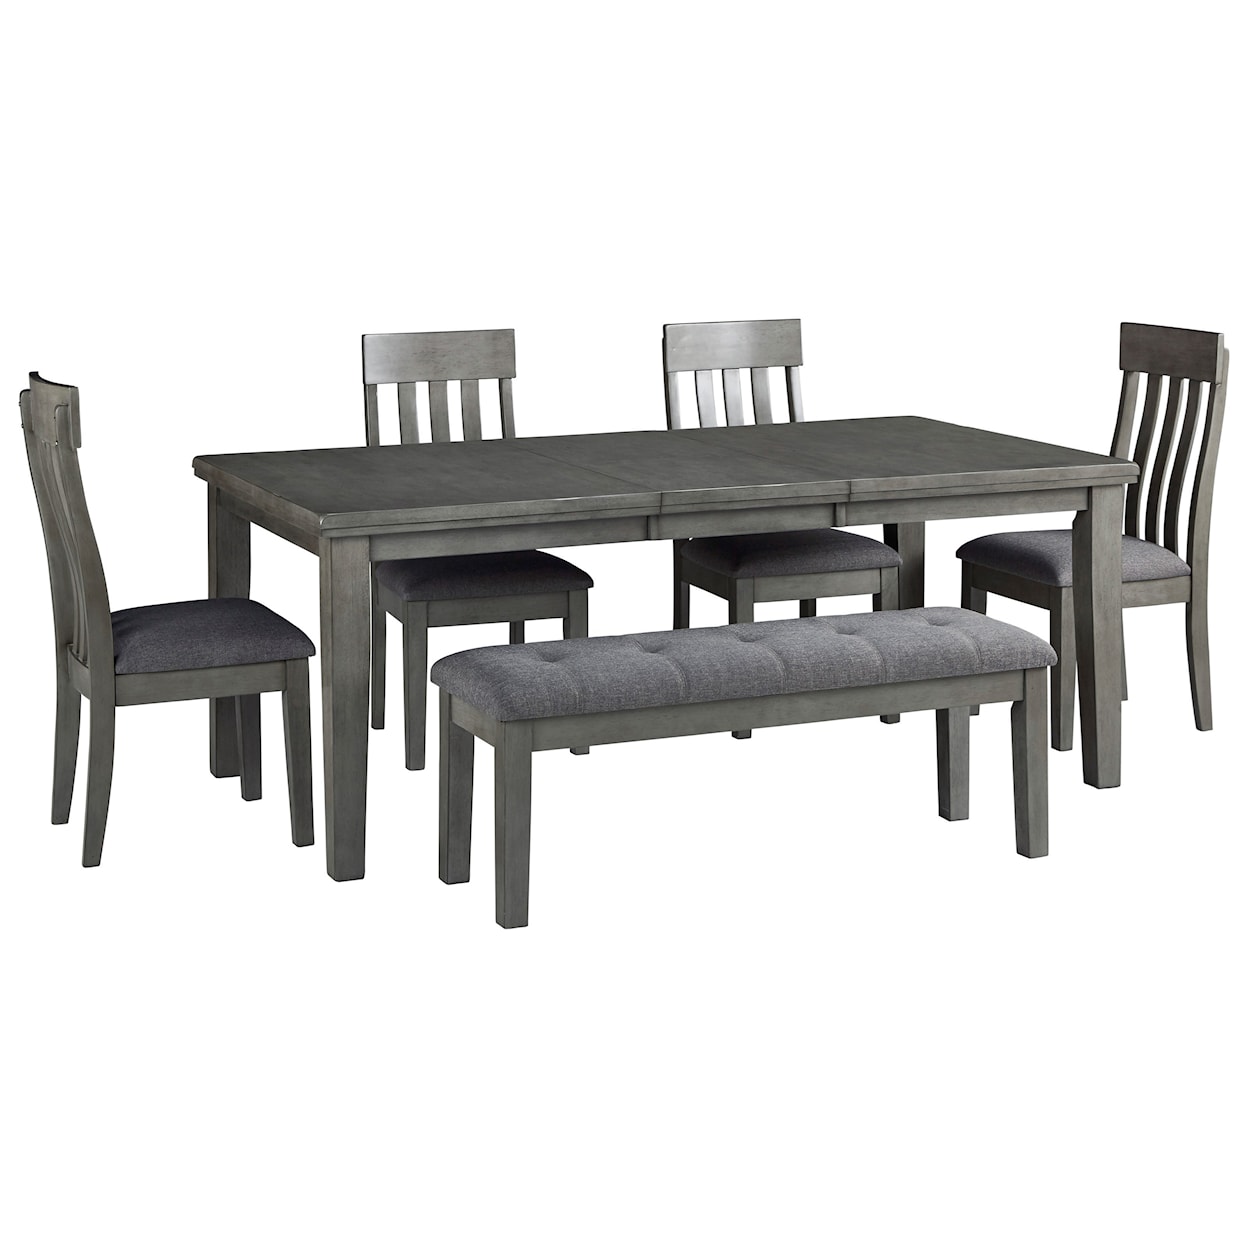 Signature Design by Ashley Hallanden Table & Chair Set with Bench